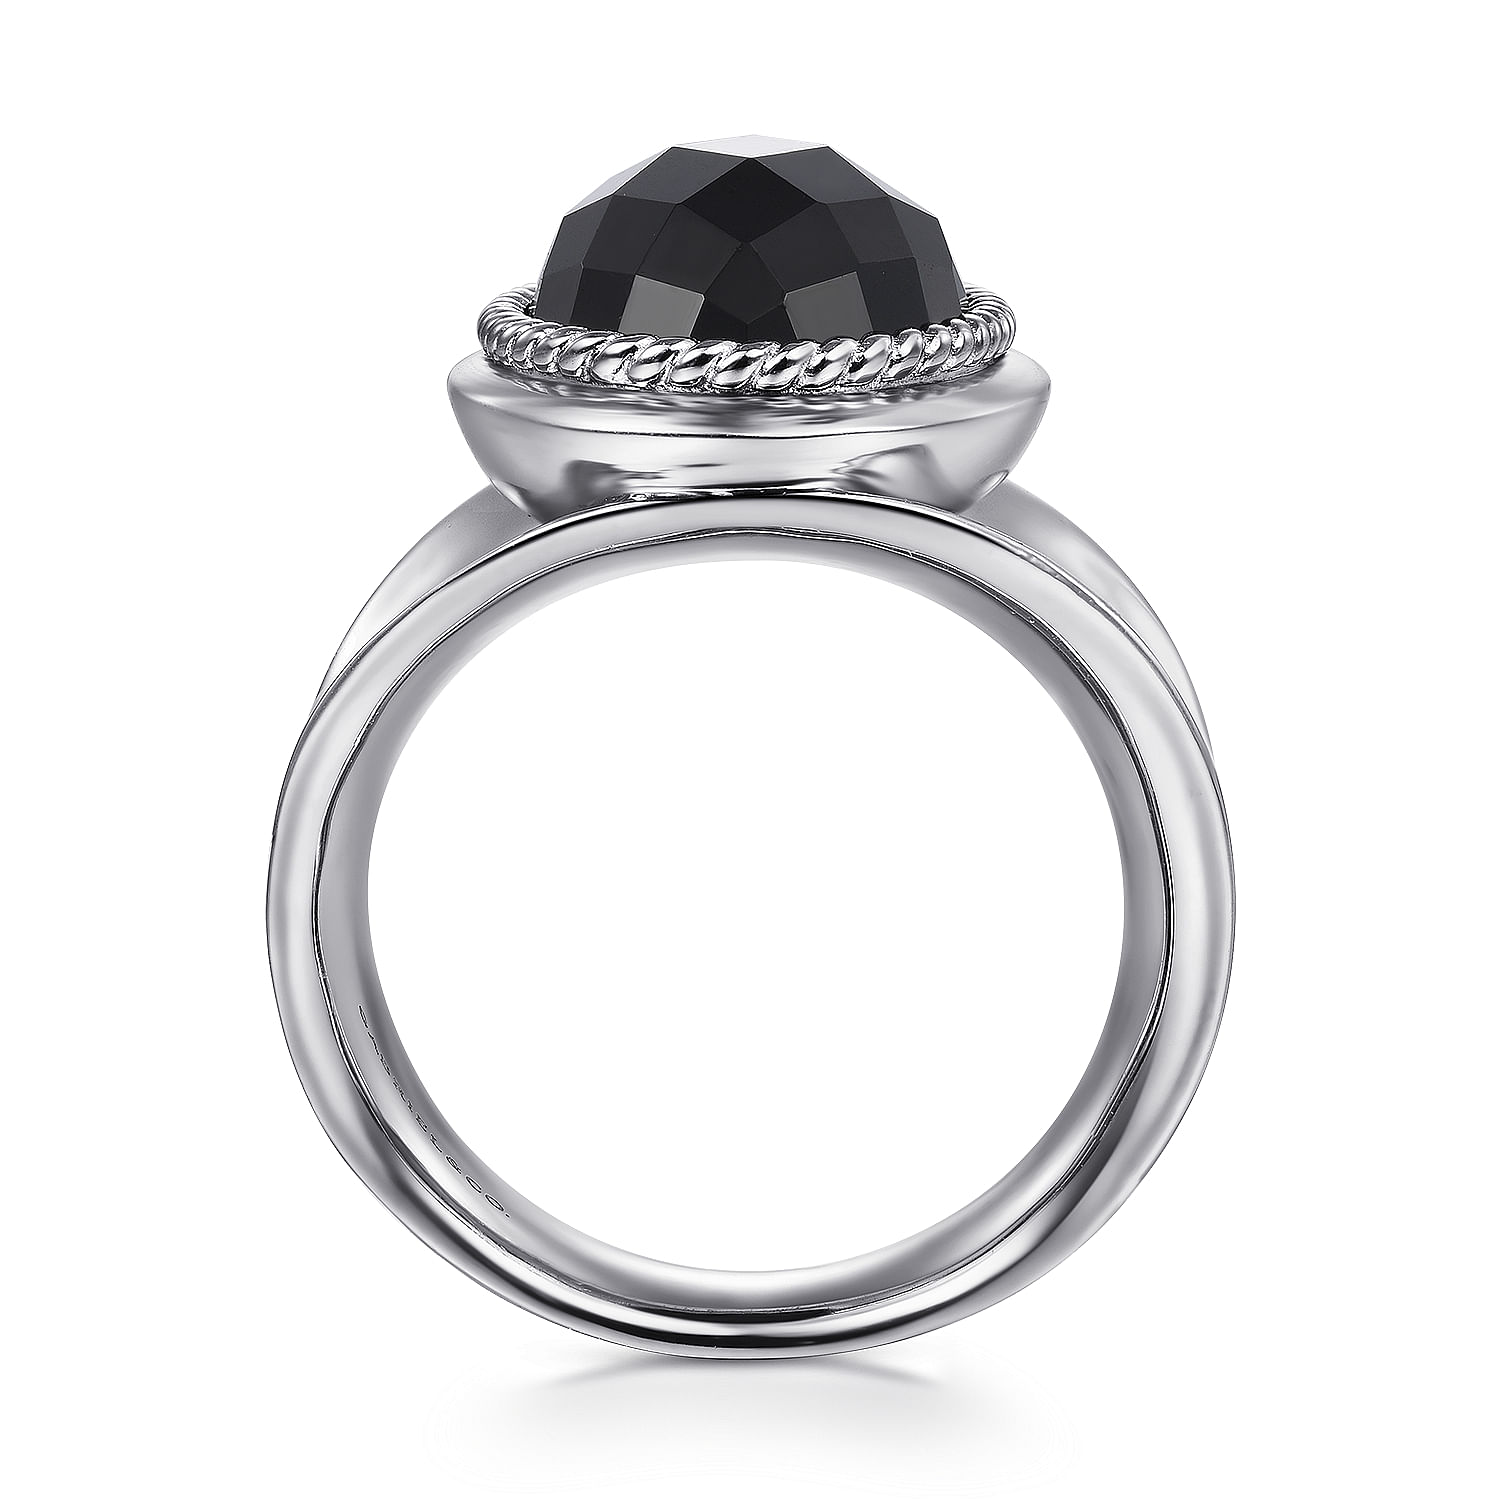 925 Sterling Silver Faceted Oval Black Onyx Wide Band Ring